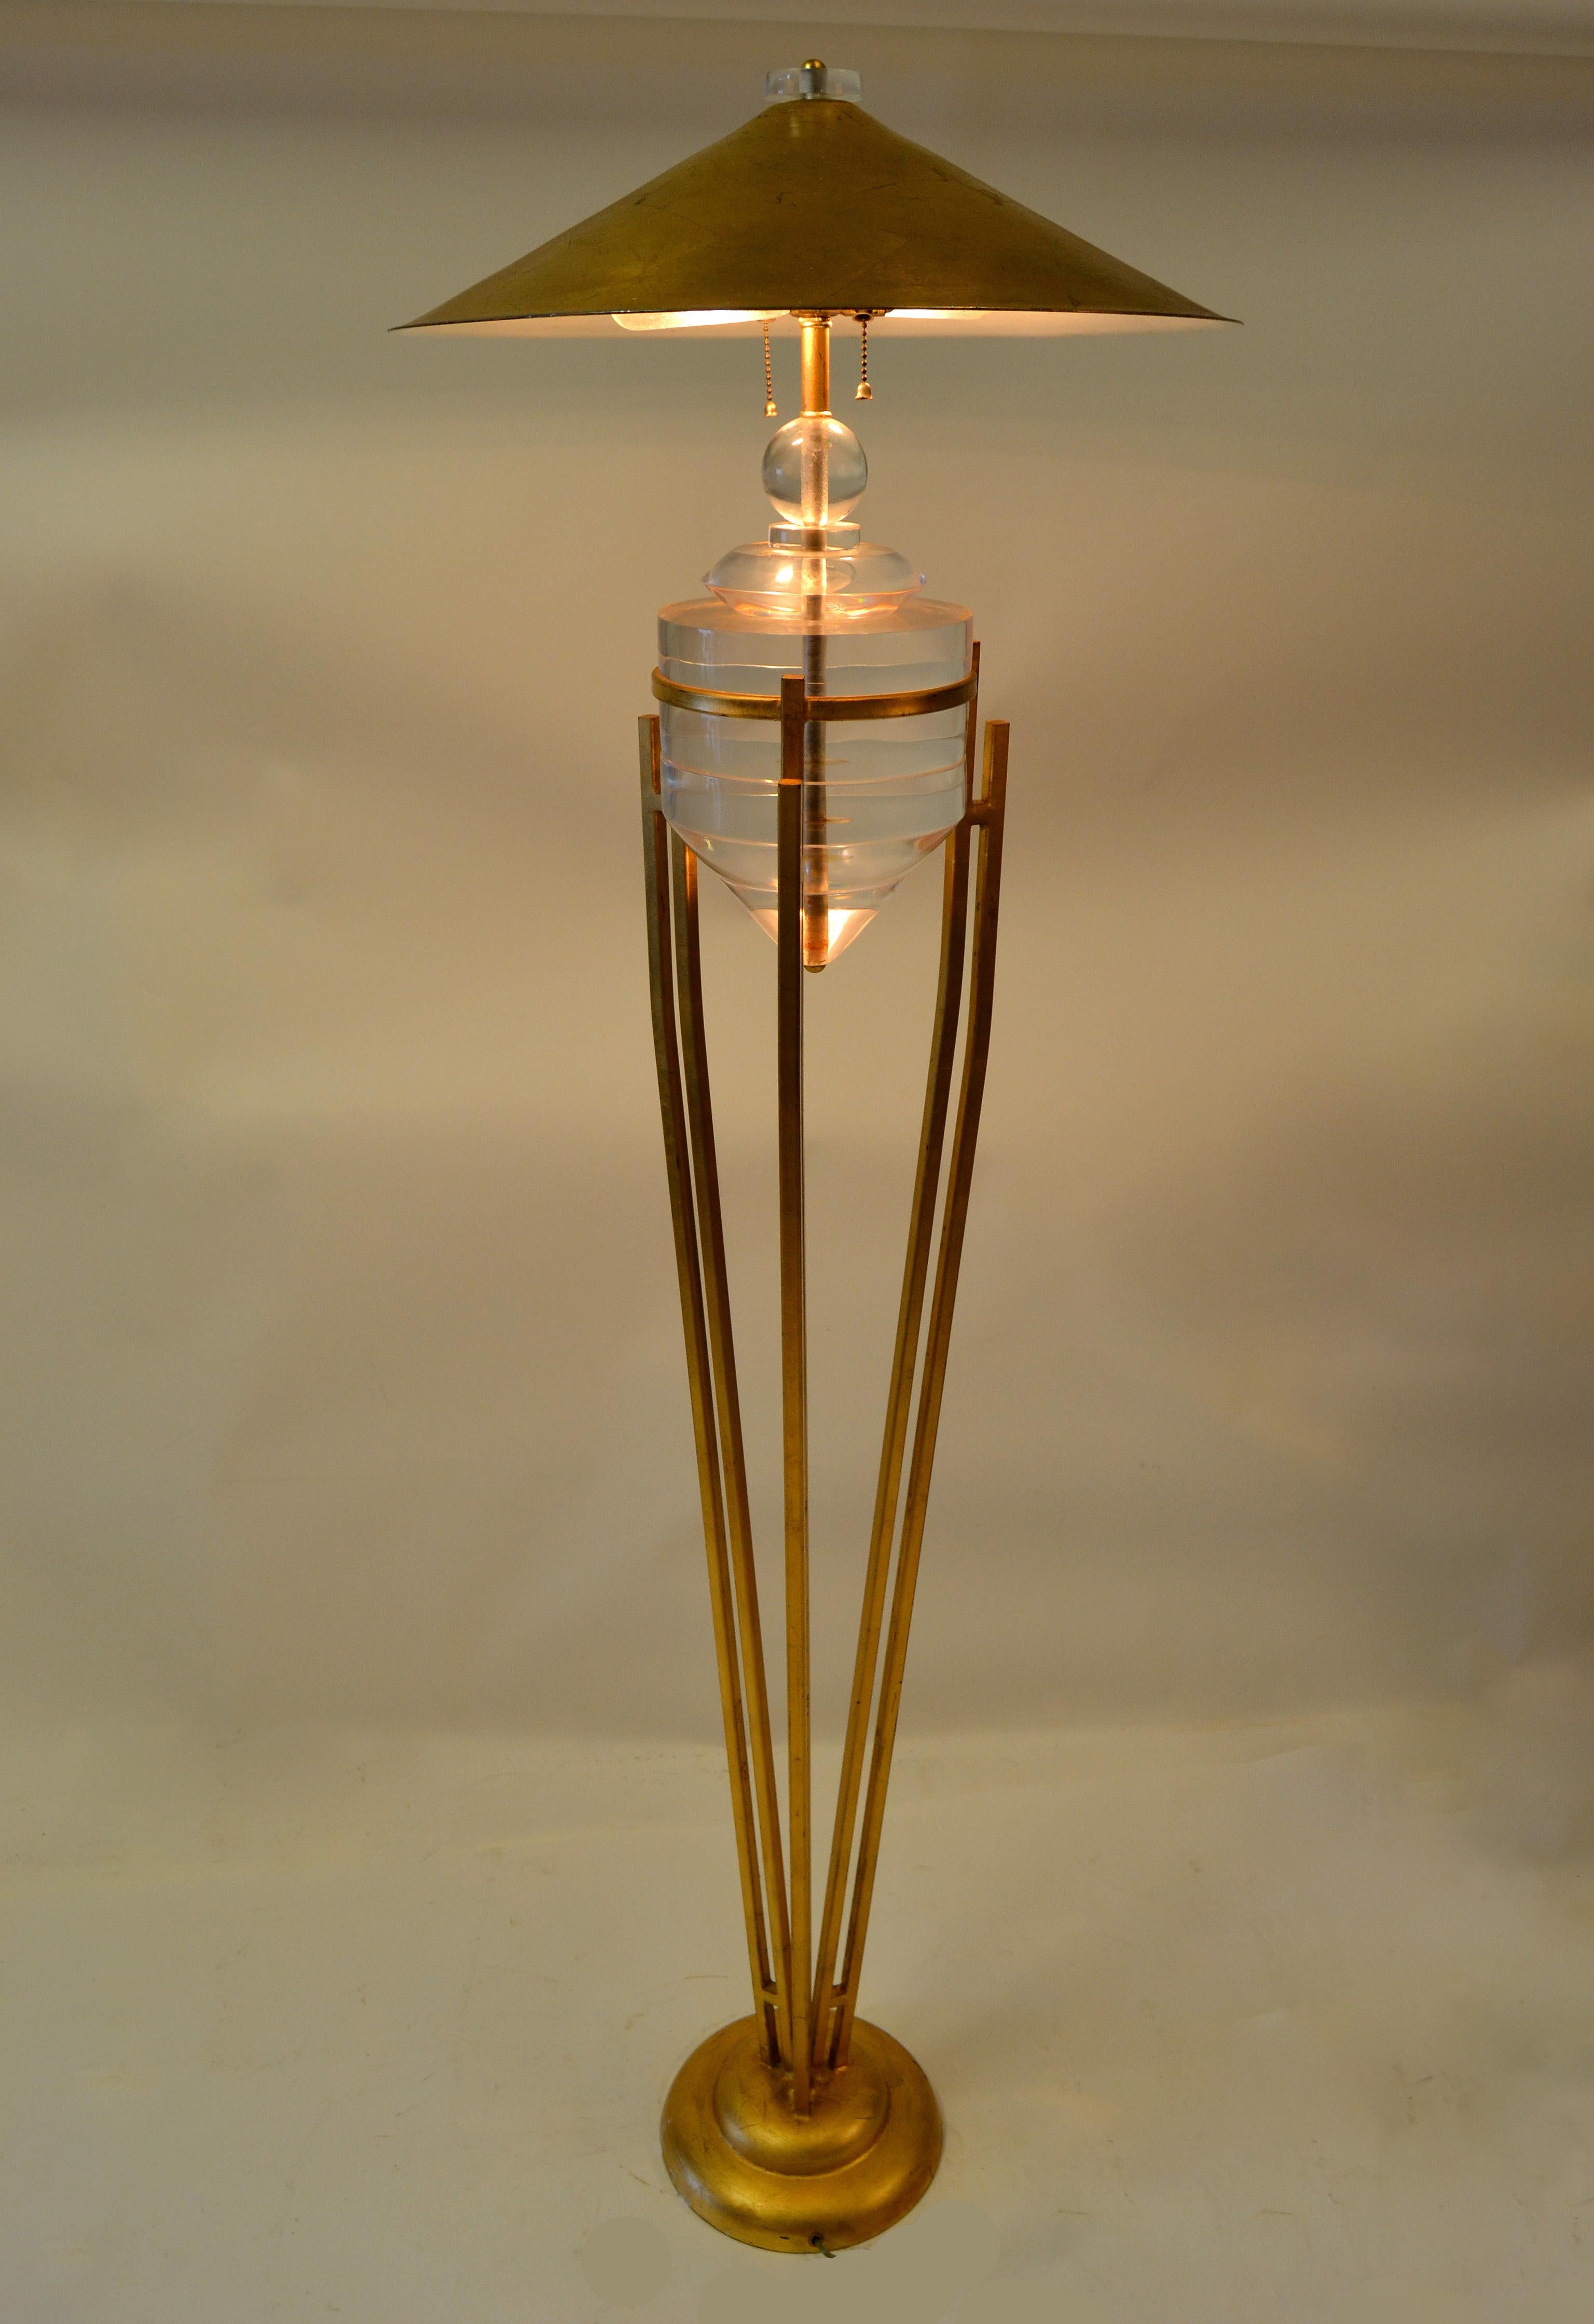 Mid-20th Century Art Deco Style Brass Metal and Stacked Lucite Module Floor Lamp Golden Shade For Sale